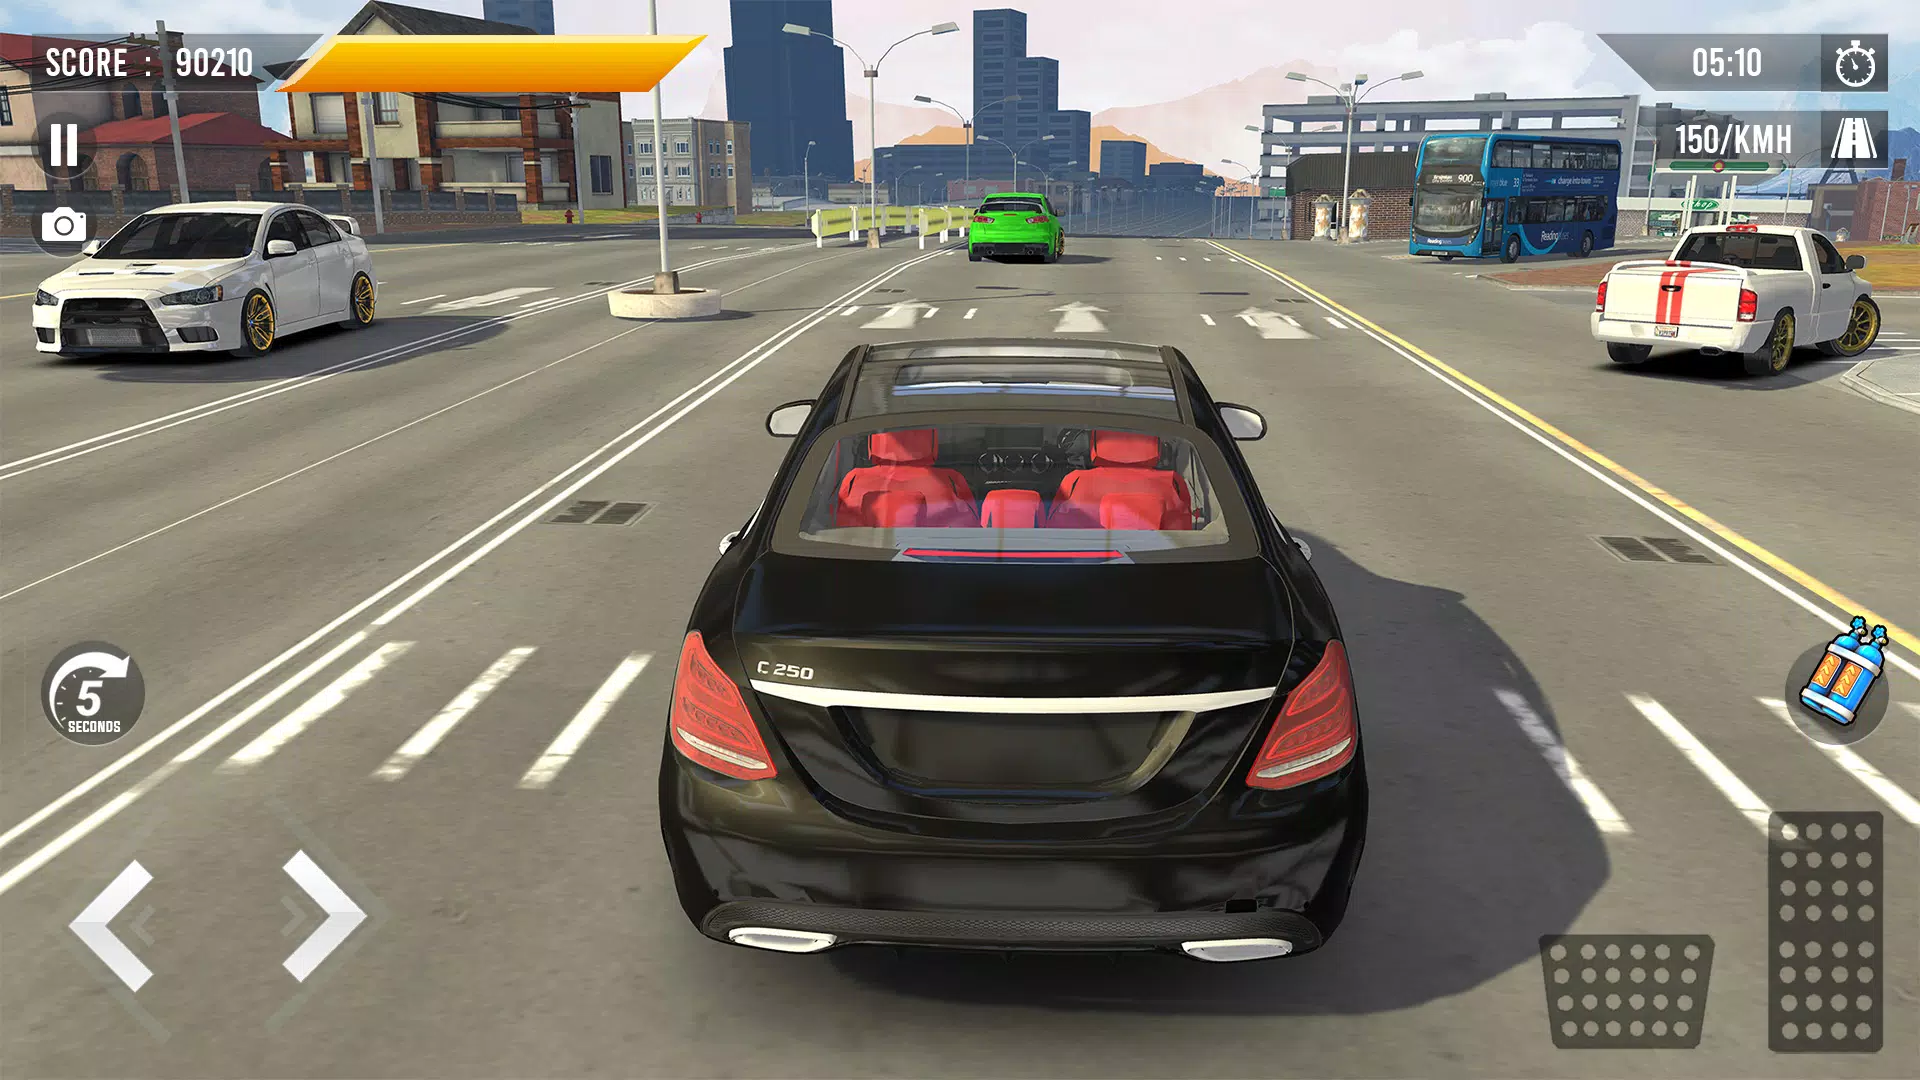 Car Driving Game - Open World for Android - Download